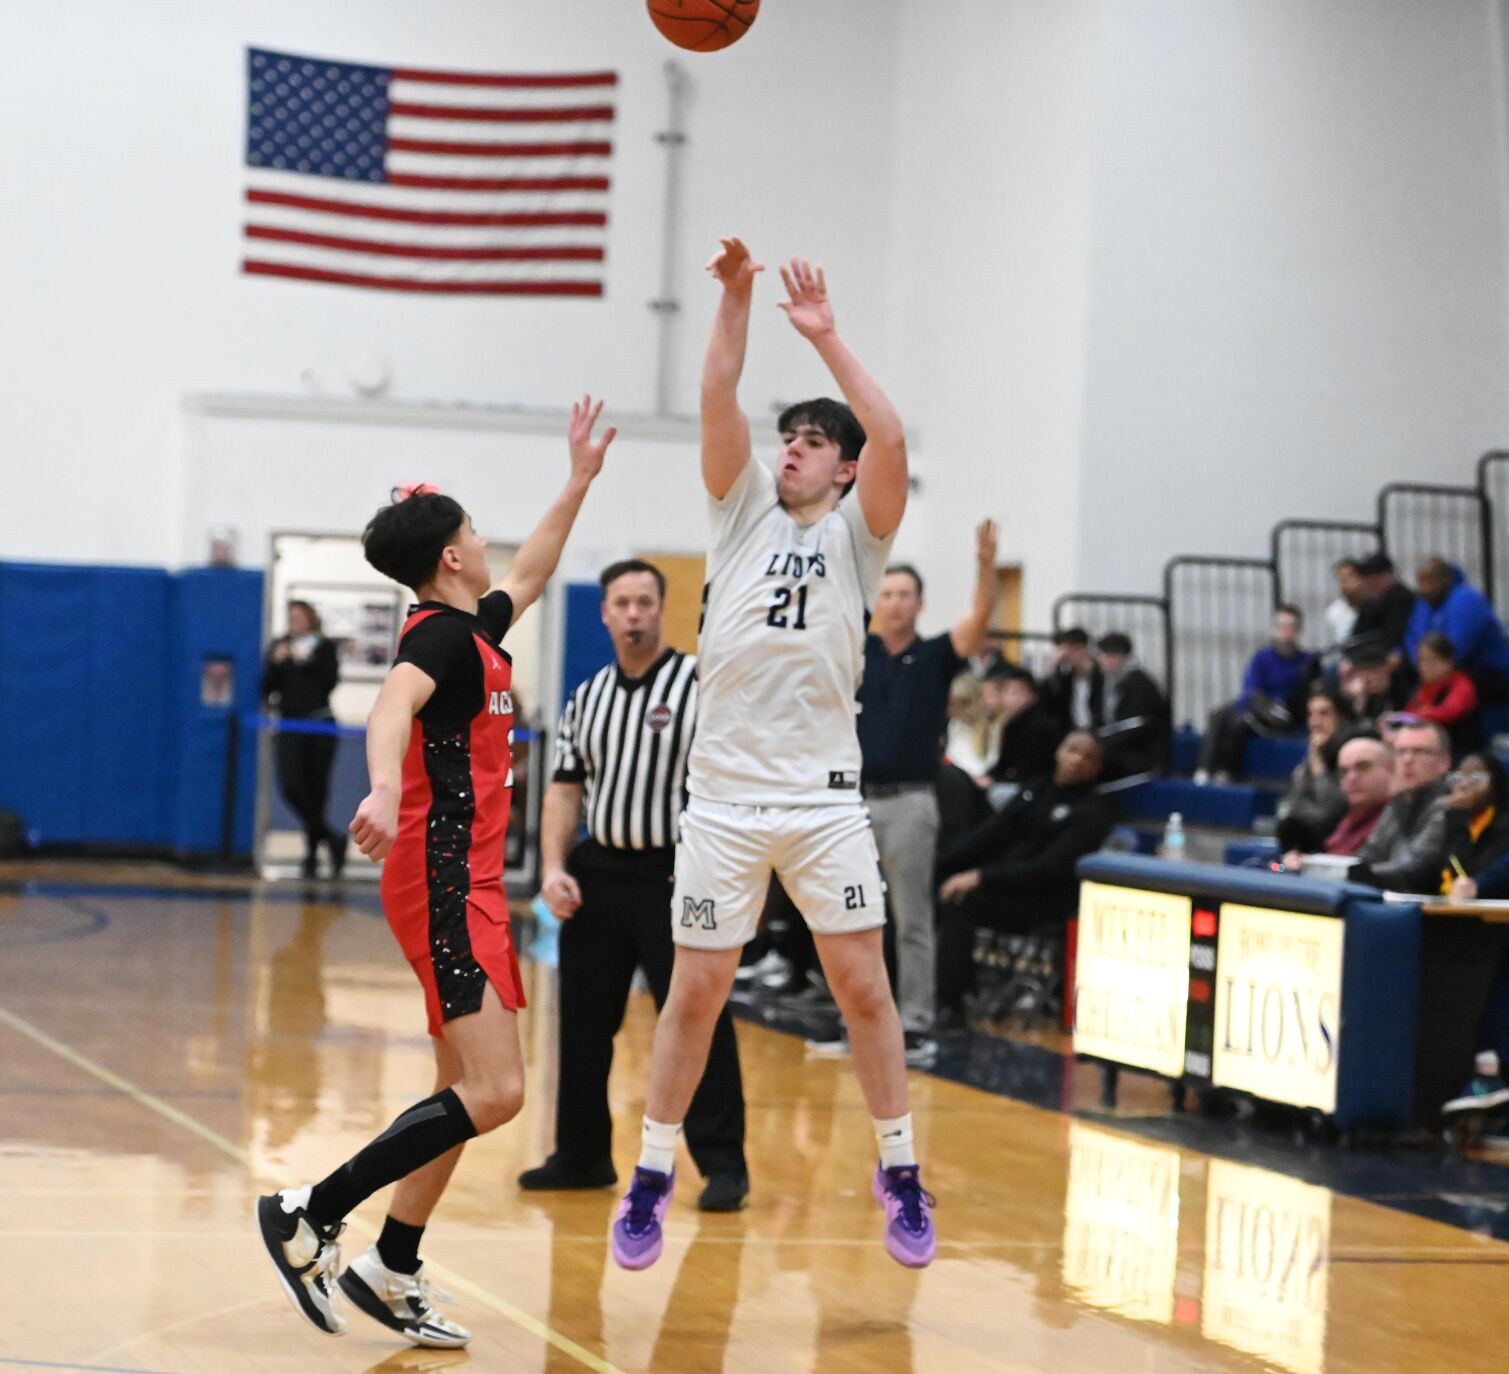 Albany Academy secures hard-fought victory over Mekeel Christian Academy in Section 2 boys’ basketball thriller